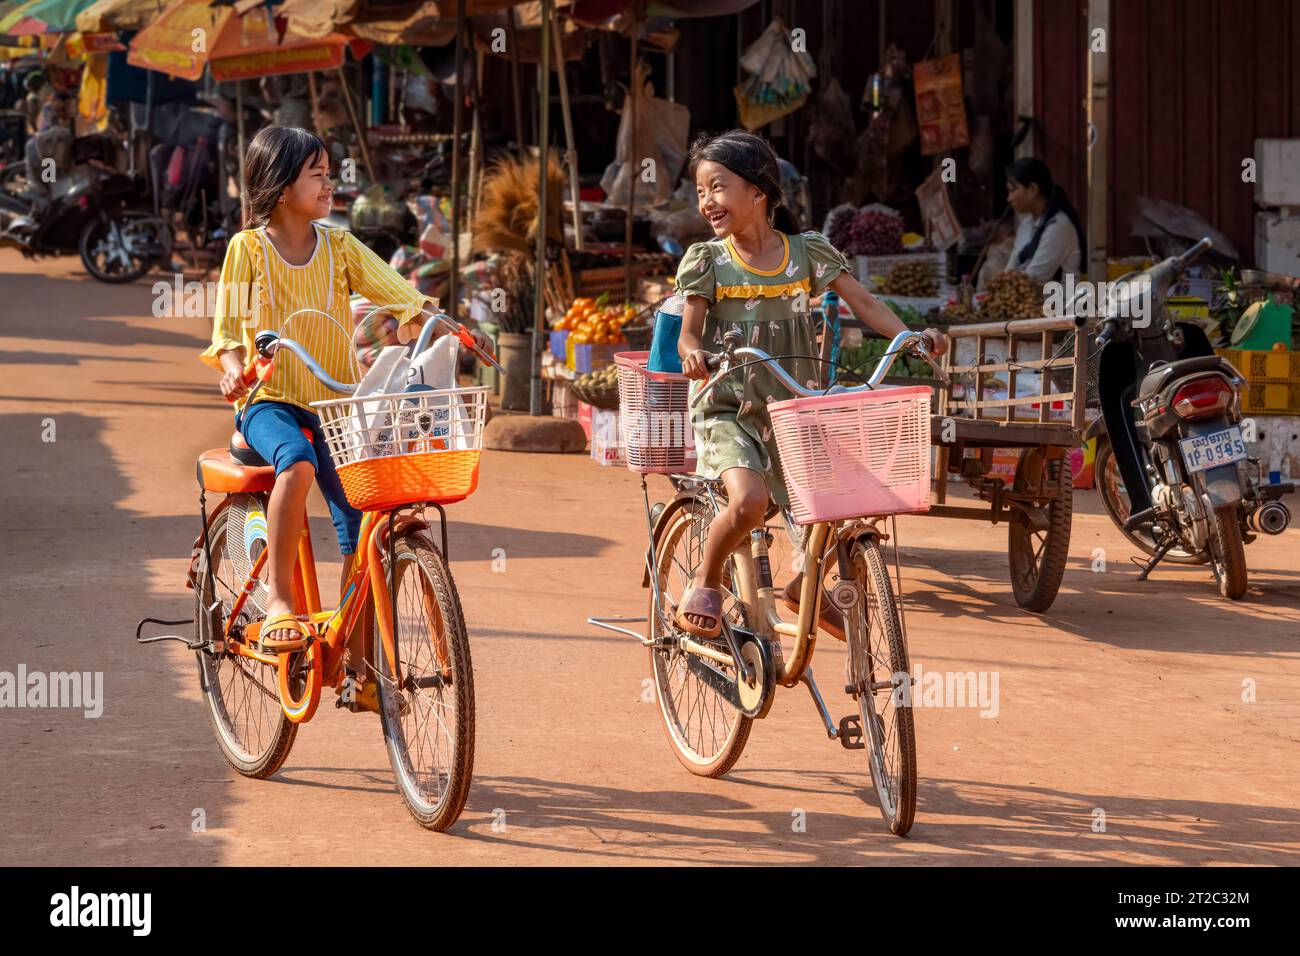 Best Freind Cycling Though Local Market at Siem Reap, Cambodia Stock Photo